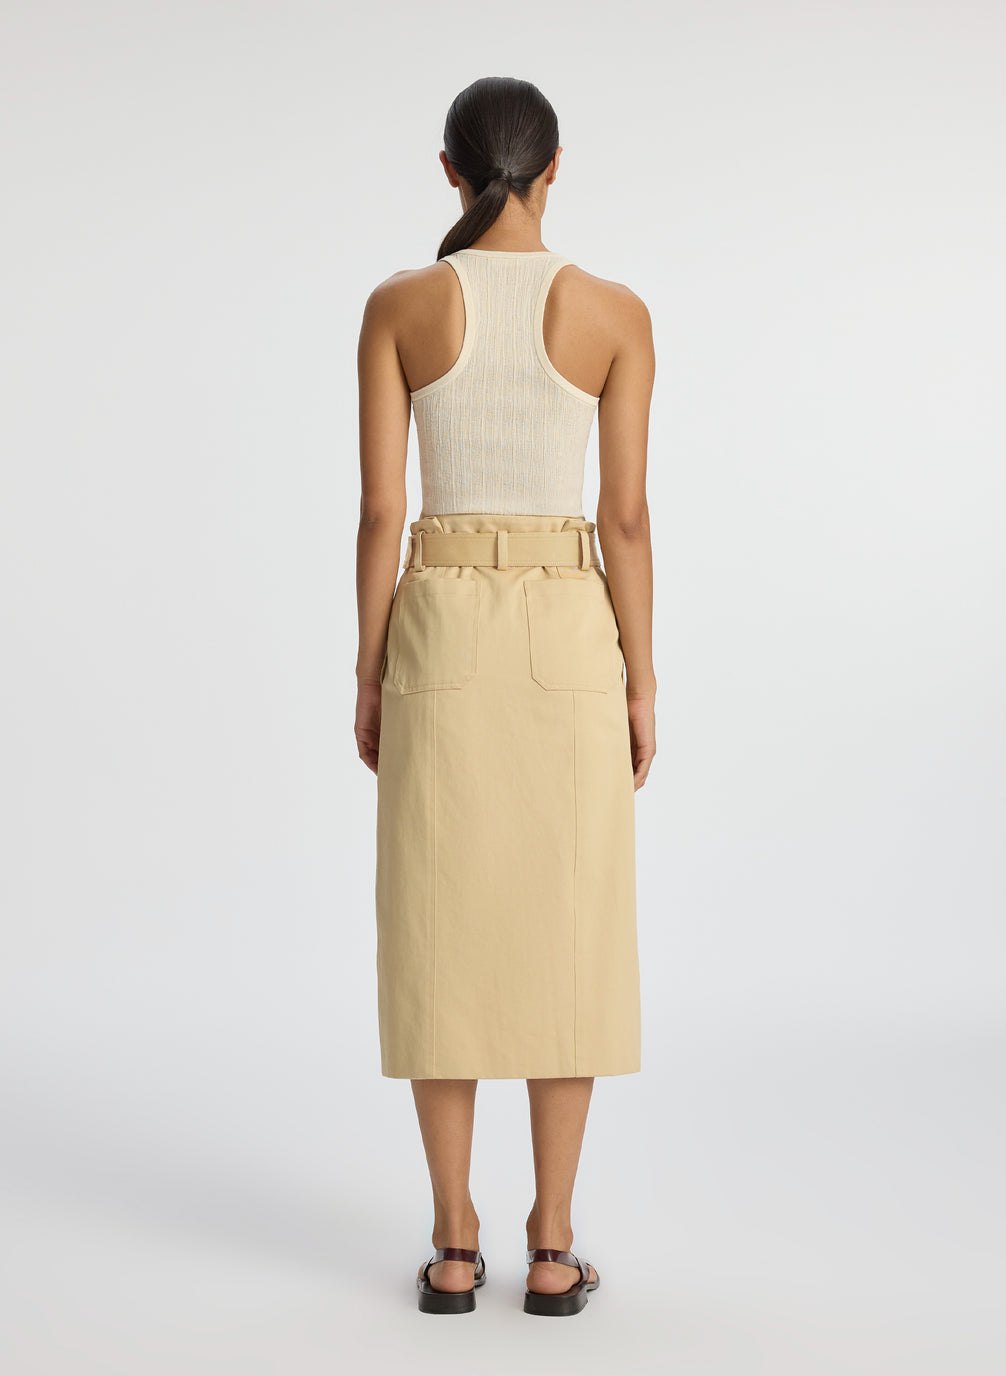 back view of woman wearing beige tank top and tan midi skirt